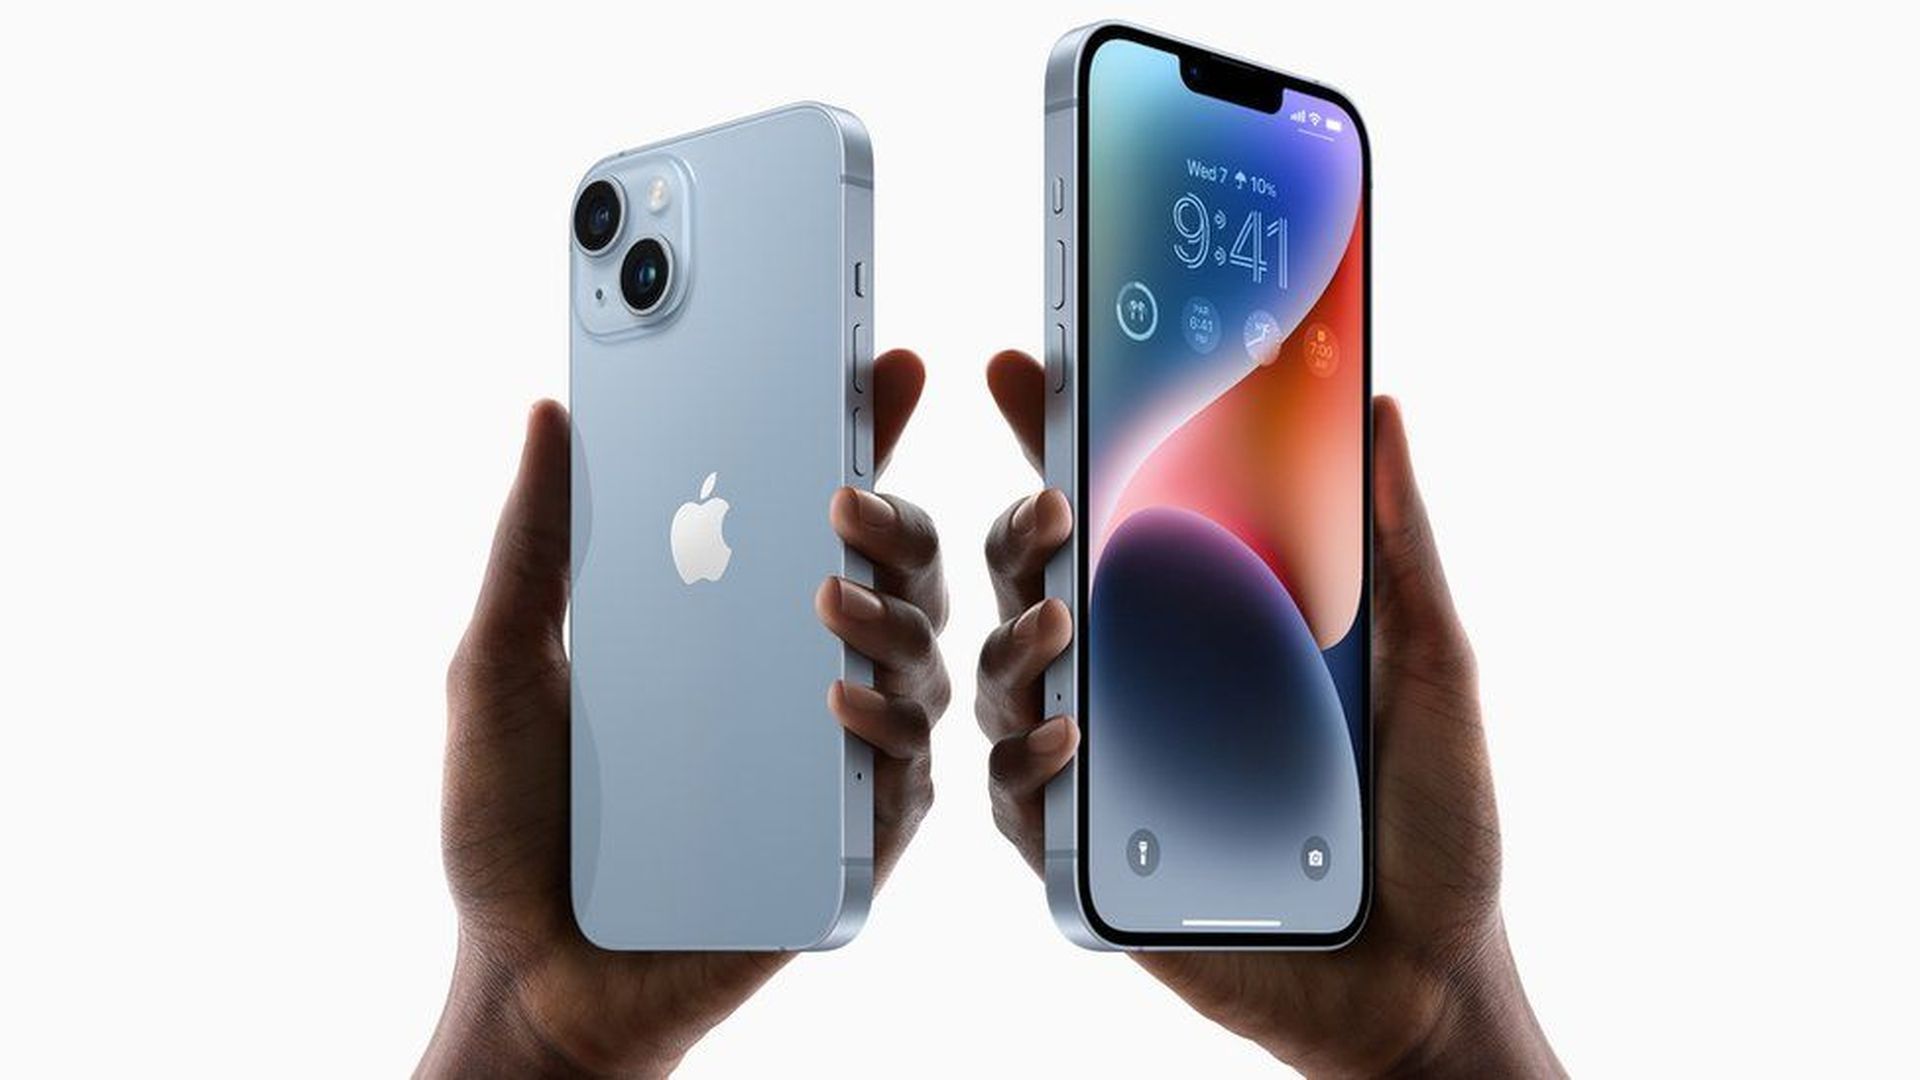 Now that the iPhone 14 lineup has been revealed, let’s take a look at iPhone 14 Pro Max vs iPhone 14 Pro and how they compare.